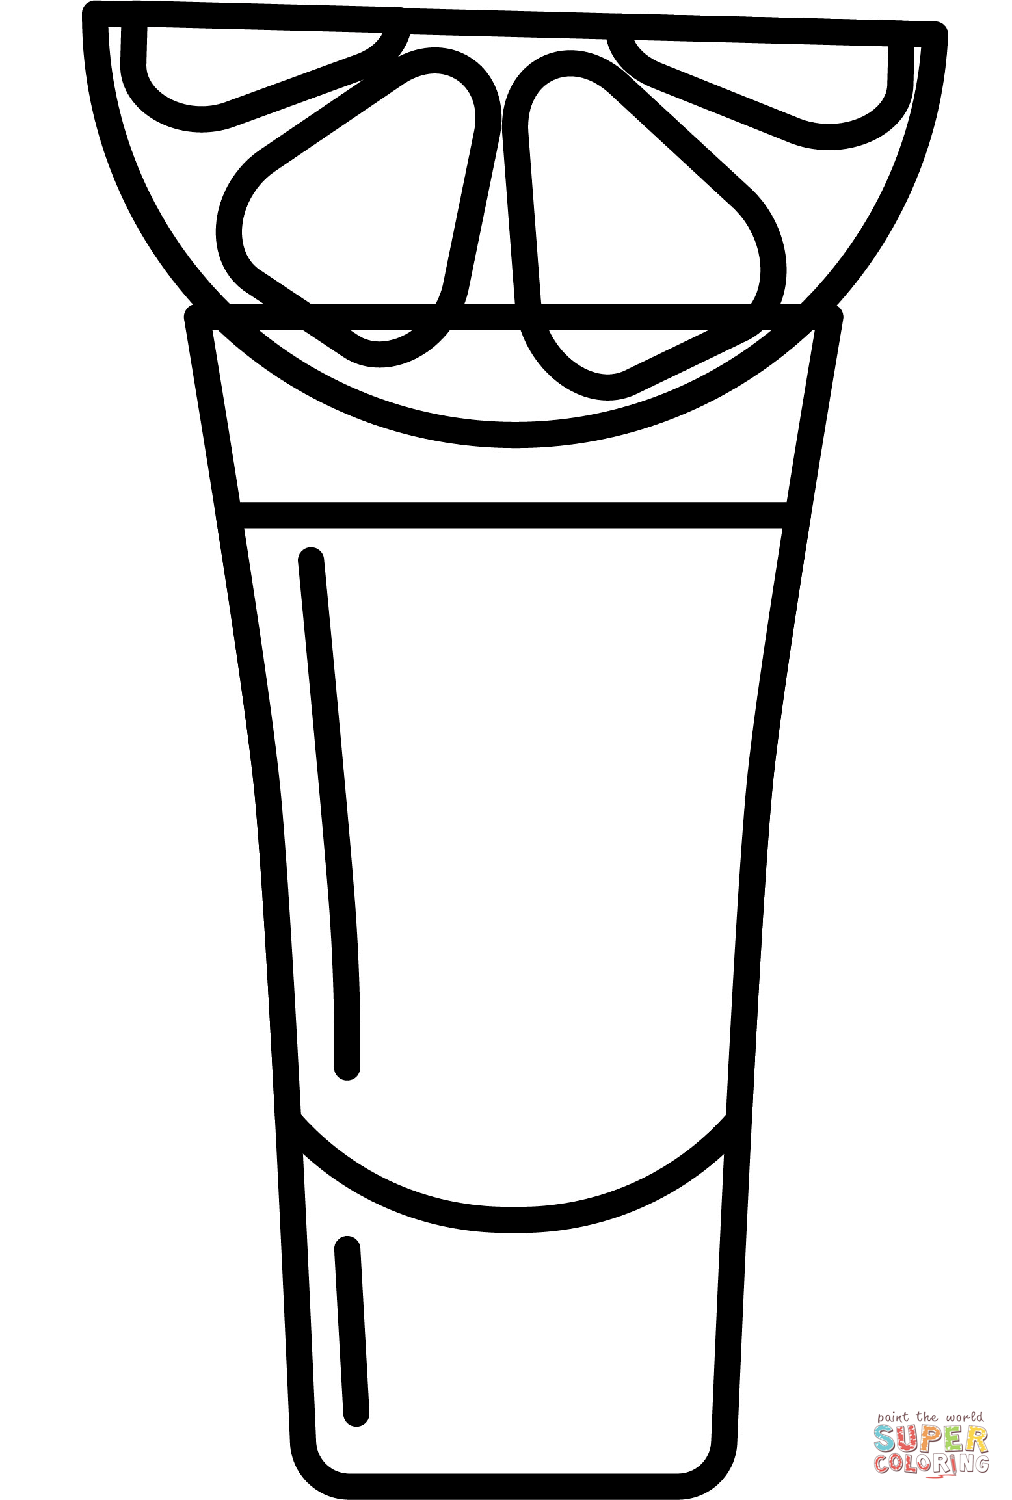 Tequila shot coloring page free printable coloring pages